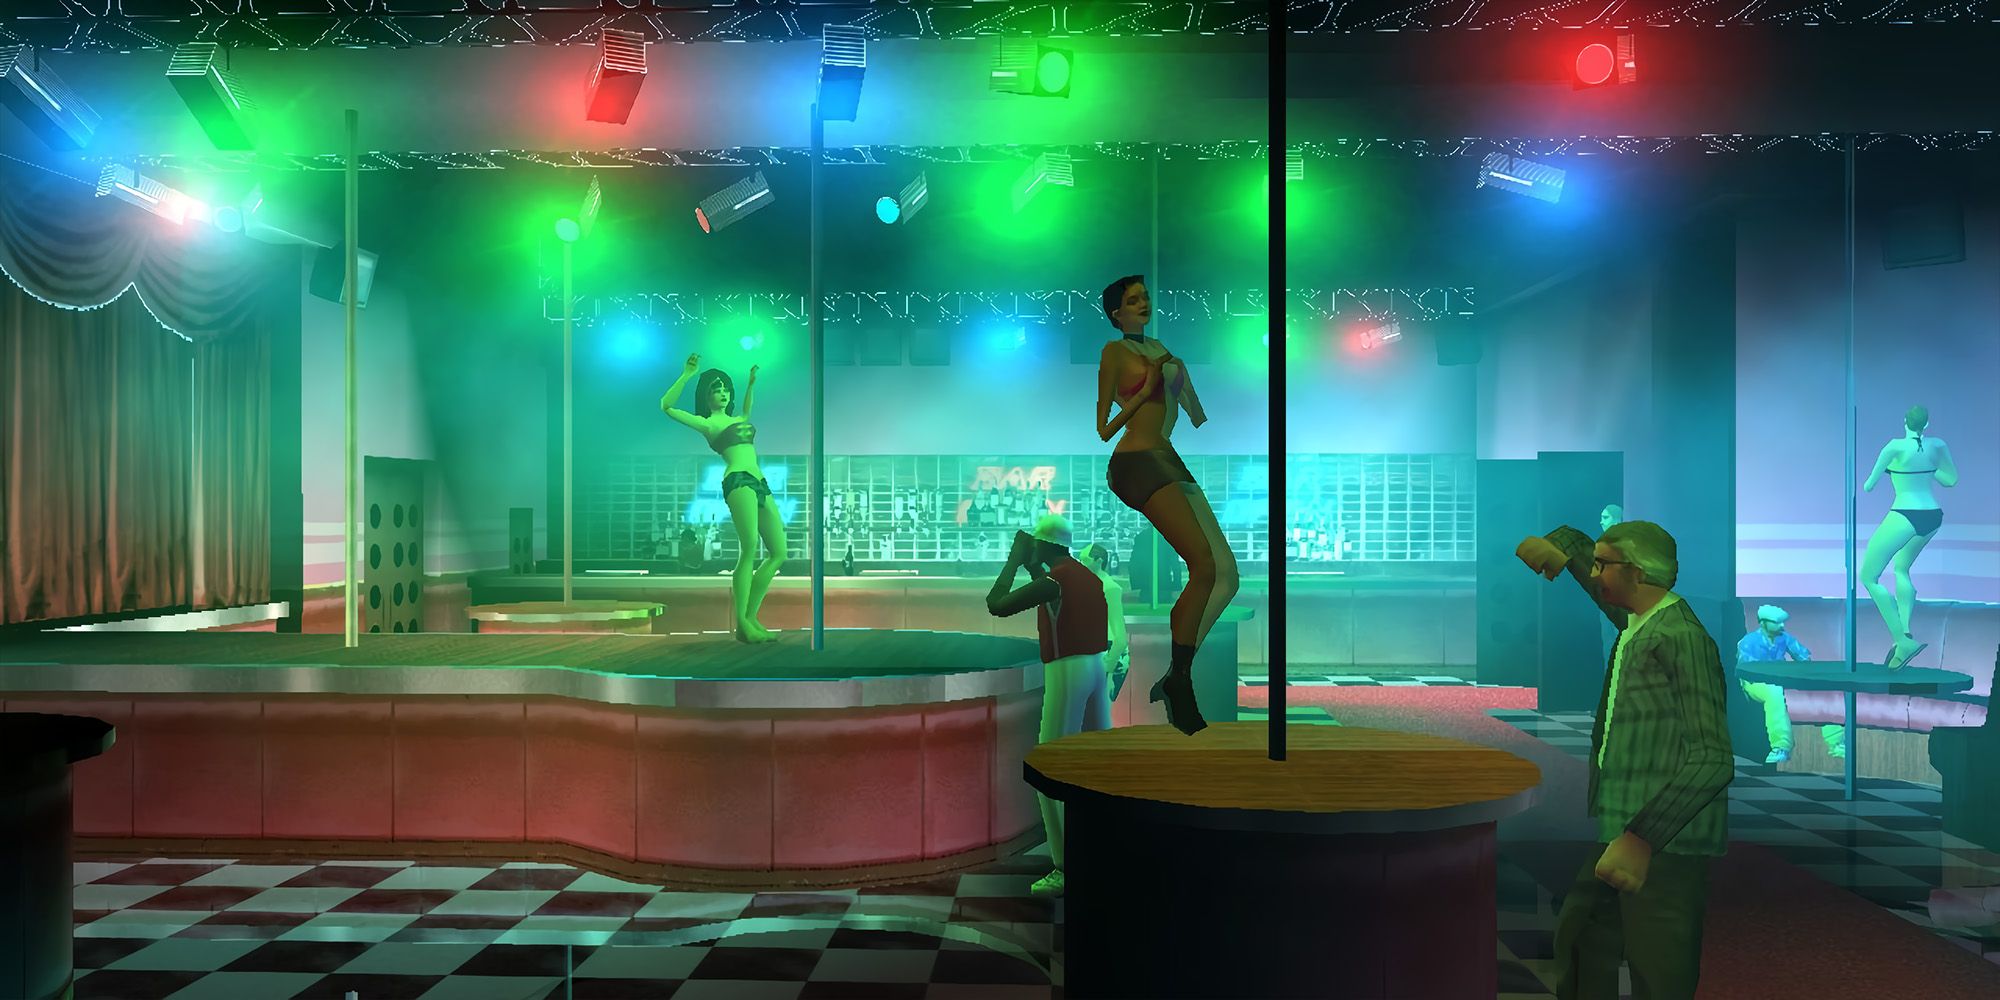 The Pole Position Club in GTA Vice City